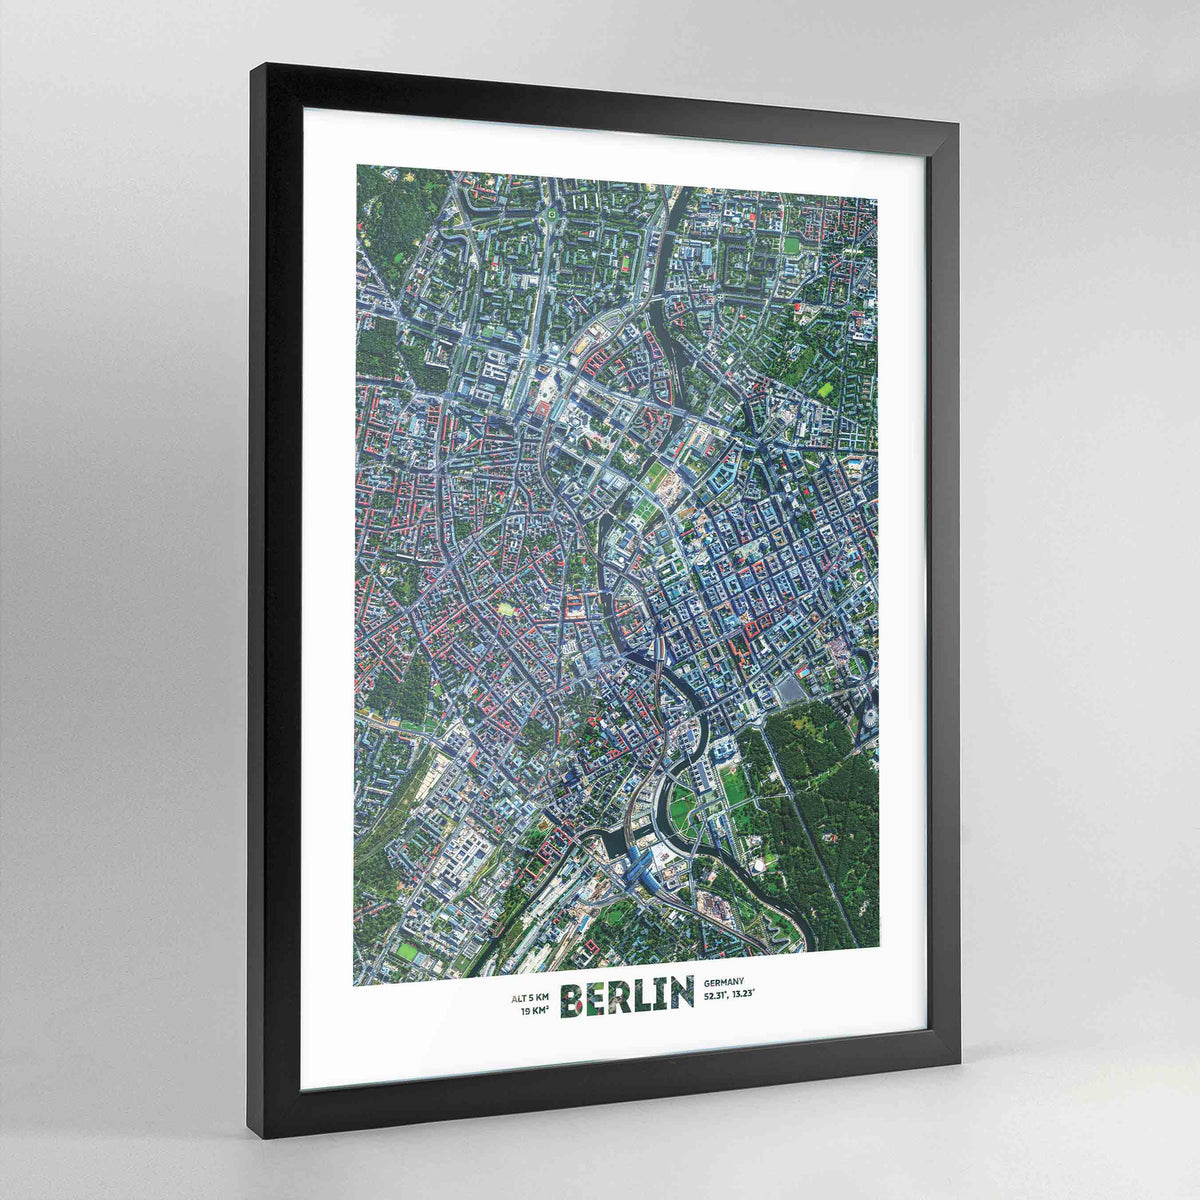 Berlin Earth Photography - Art Print - Point Two Design